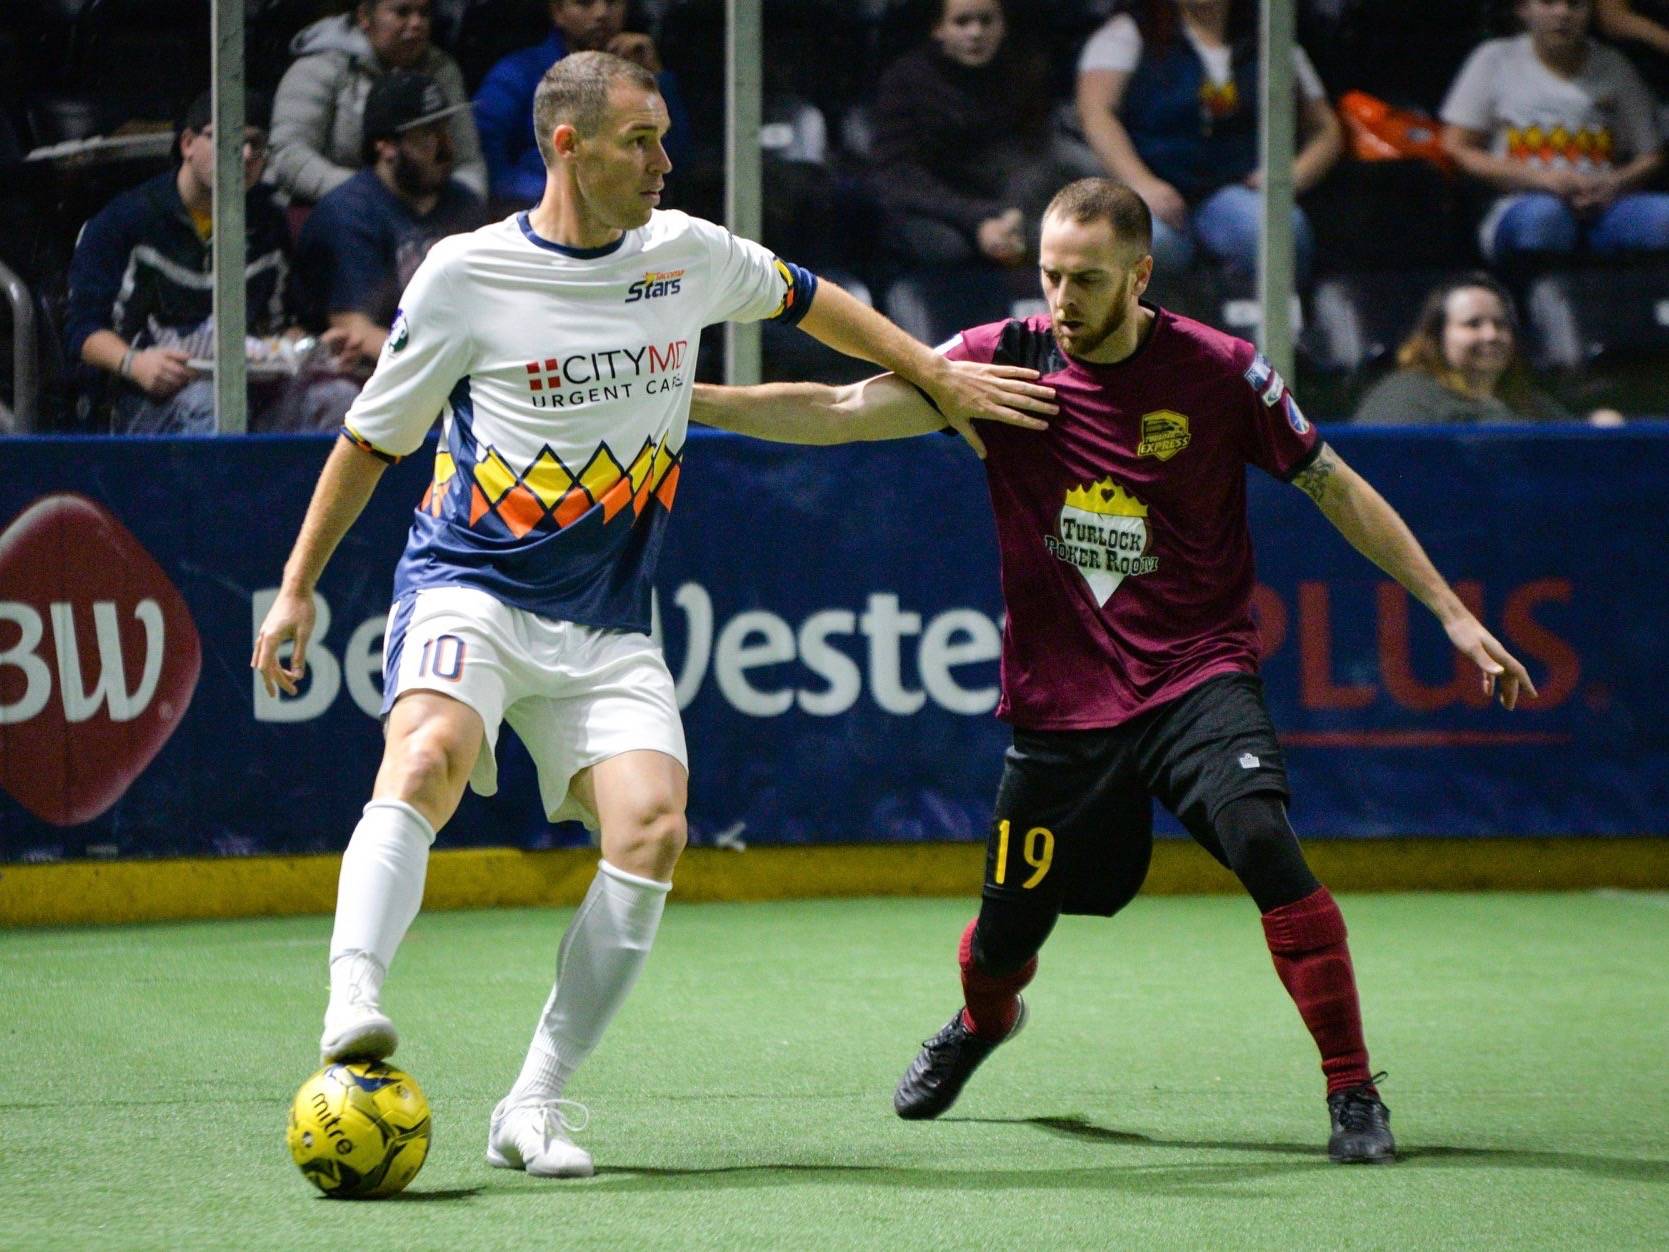 The Stars’ Nick Perera looks to advance the ball against the Express’ Matthew Germain during MASL play Saturday night. COURTESY PHOTO, Stars